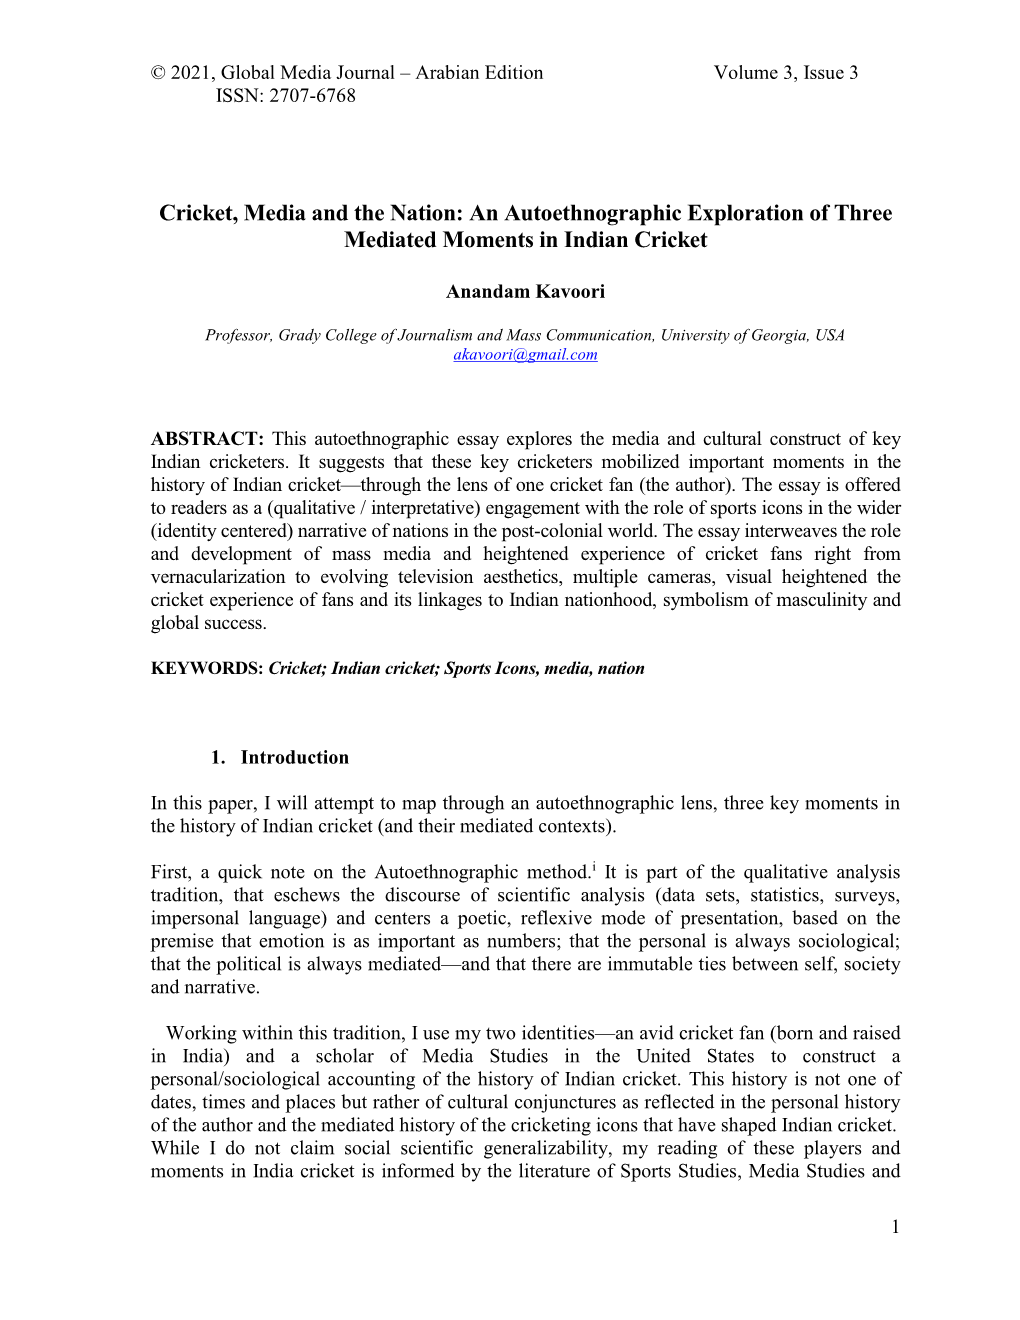 Cricket, Media and the Nation: an Autoethnographic Exploration of Three Mediated Moments in Indian Cricket